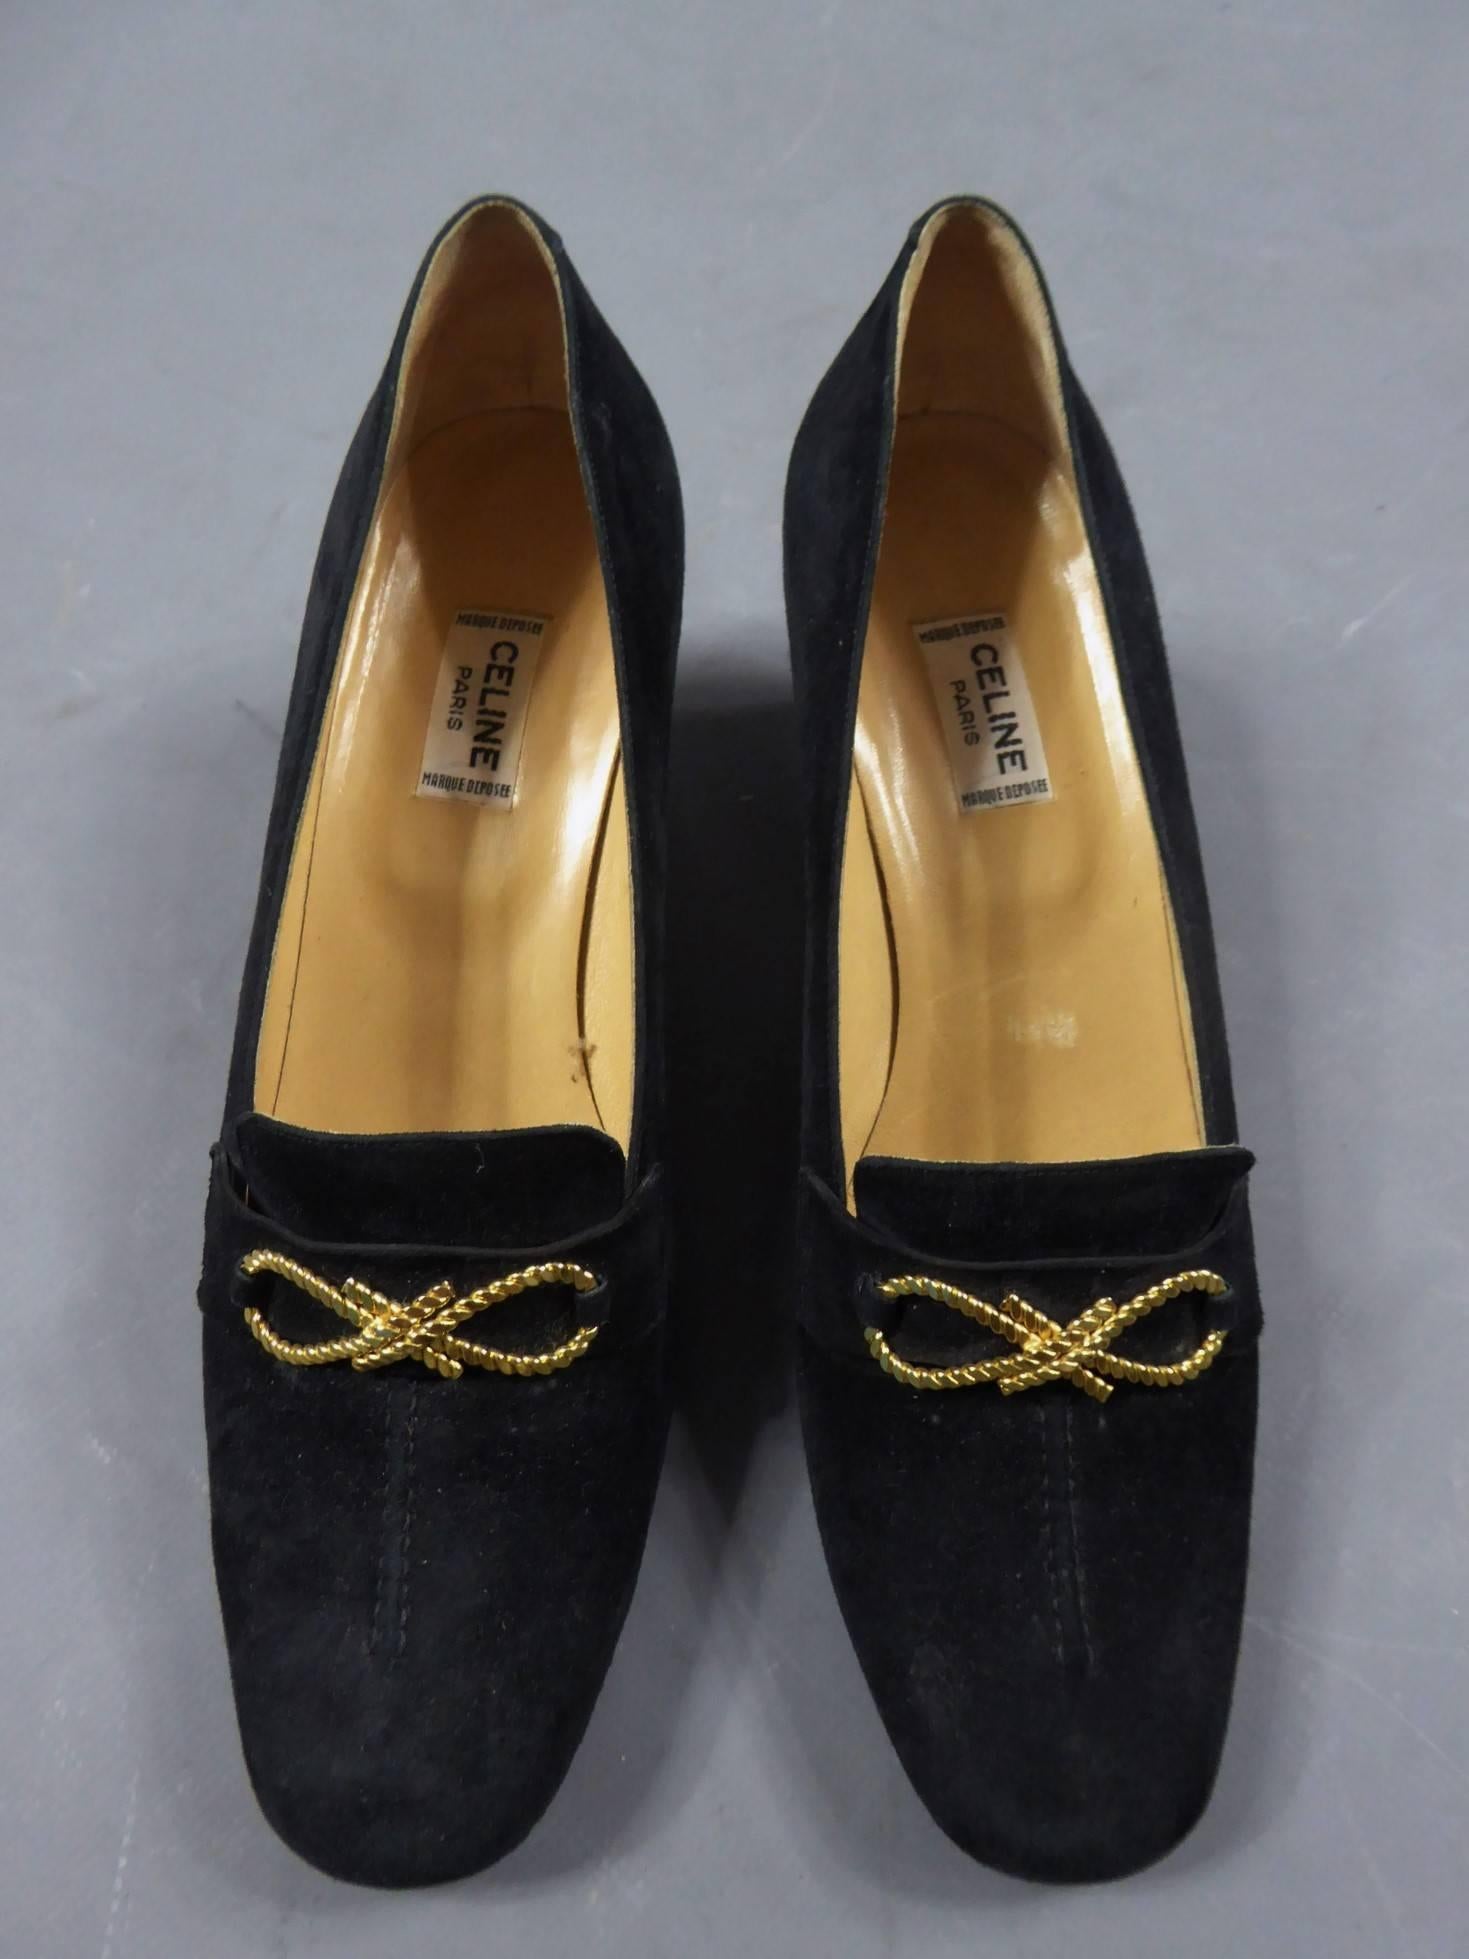 Circa 1980

France

Céline shoes in black nubuck, moccasin style. Stitches on the top and  strip. Navy knot in a 8 shape and imitation golden rope, also ending on the heel. White label black graphics saying Céline Paris Marque déposée.

Height of